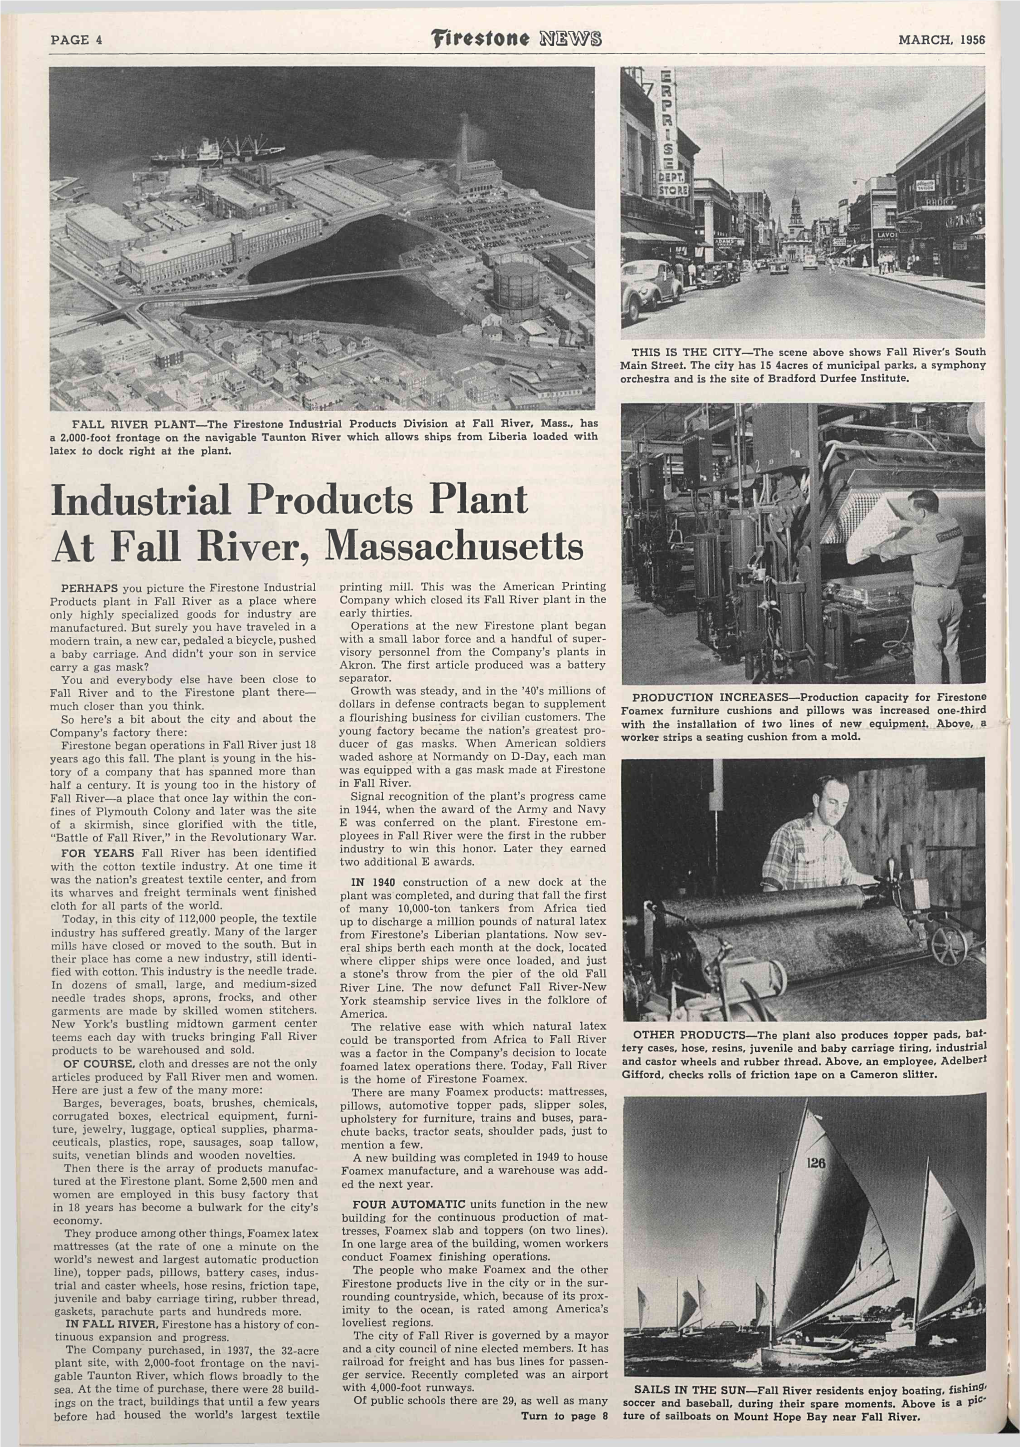 Industrial Products Plant at Fall River, Massachusetts